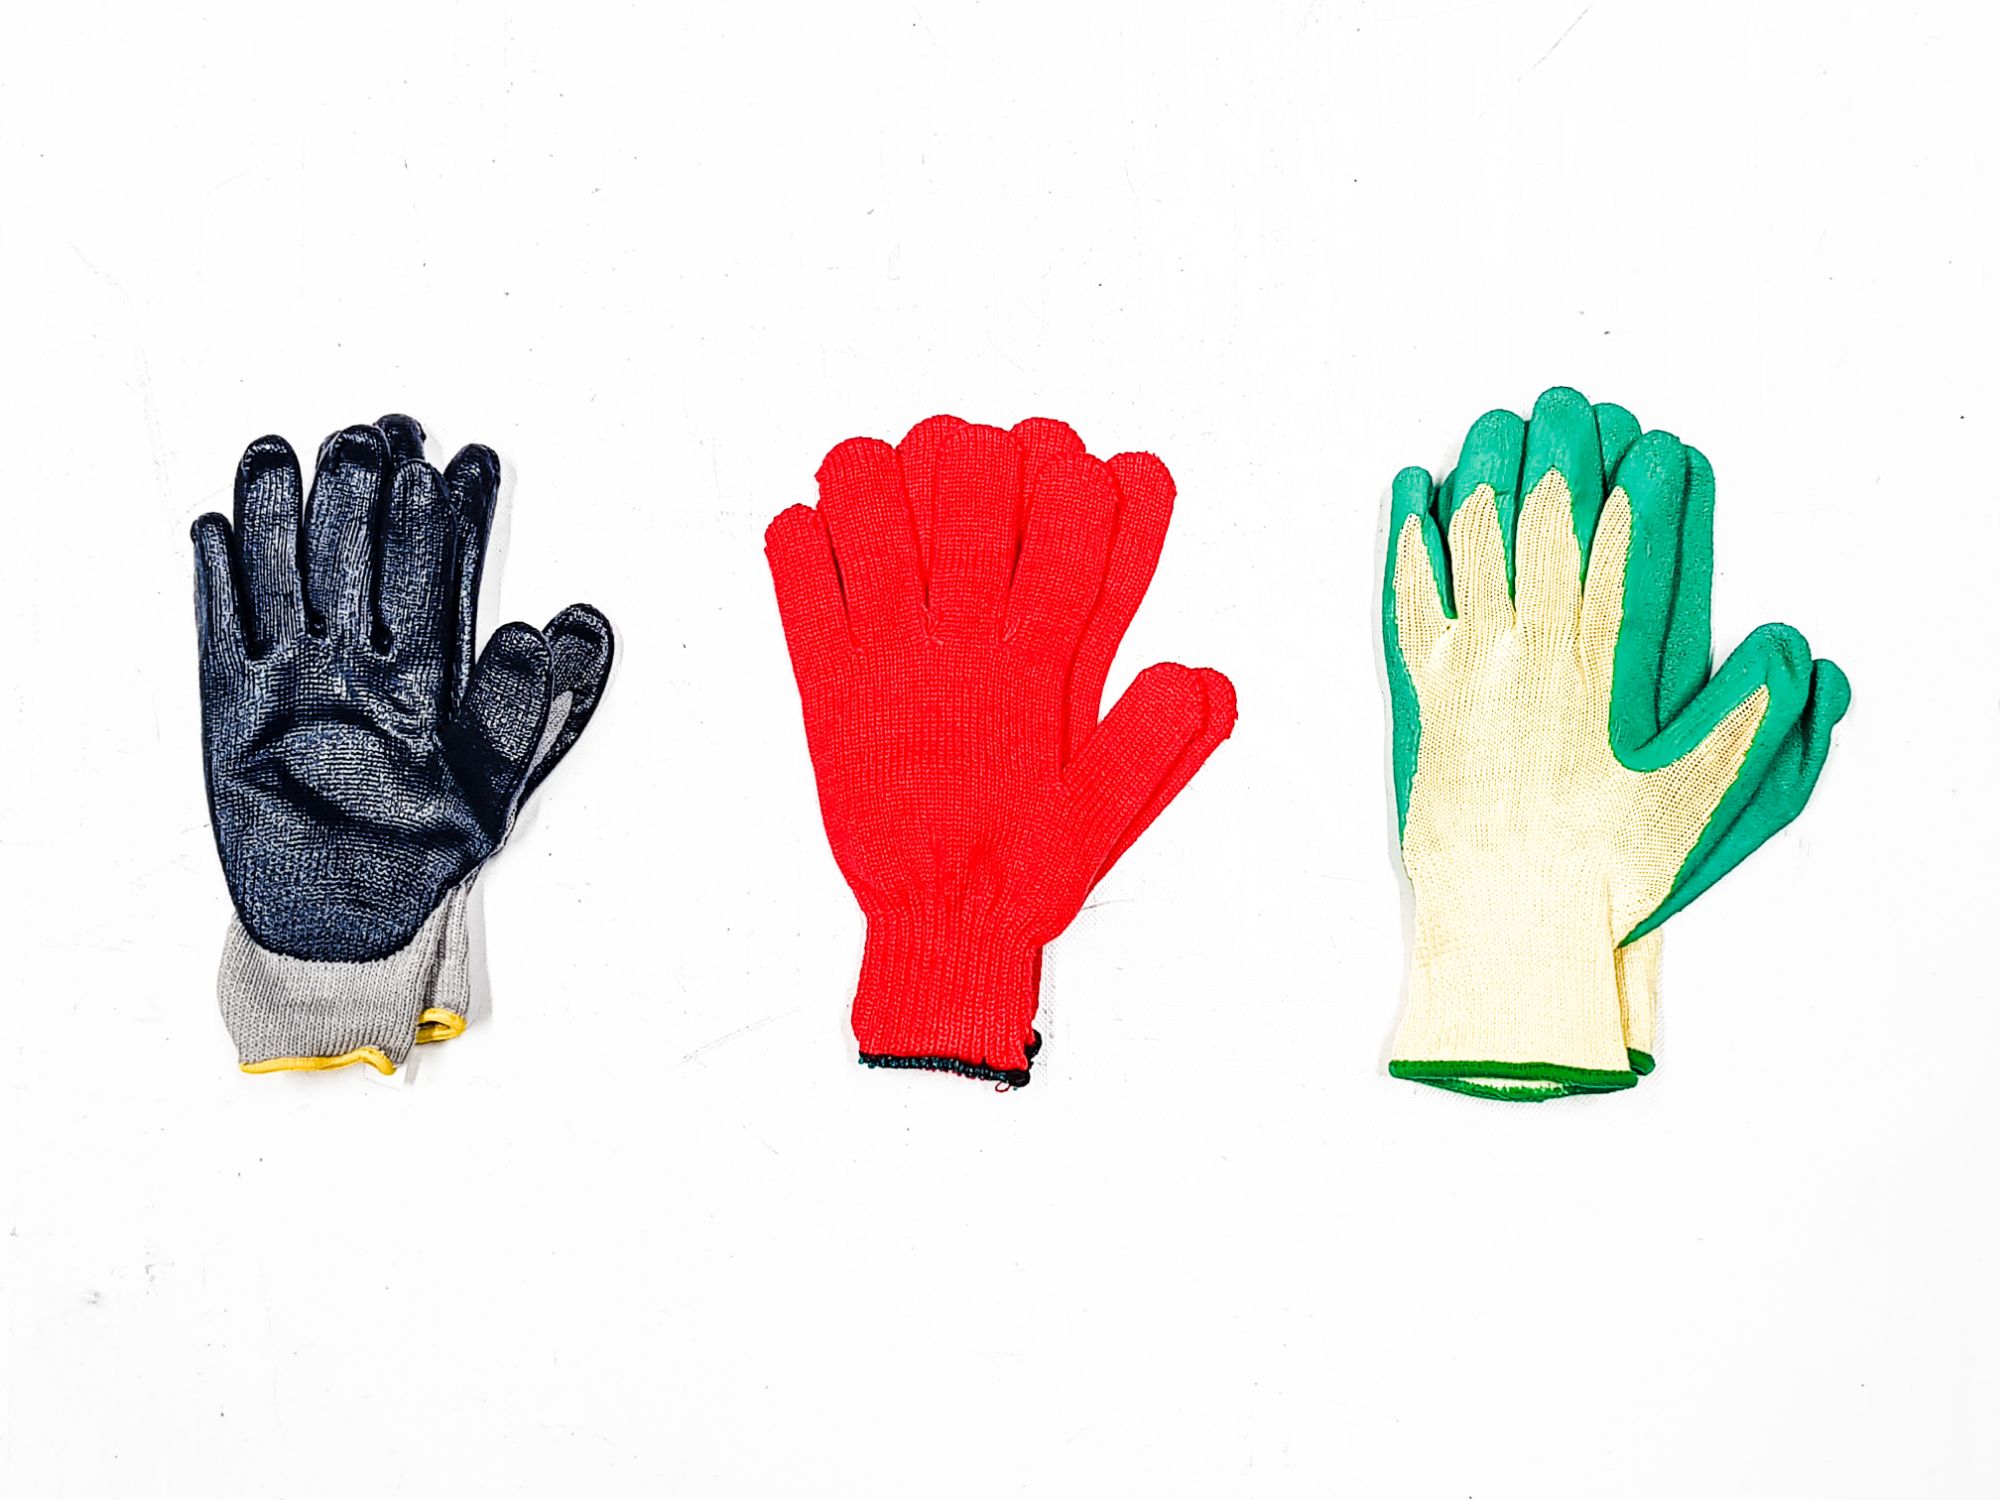 Standard Fishing Gloves For Sale in Perth, Western Australia